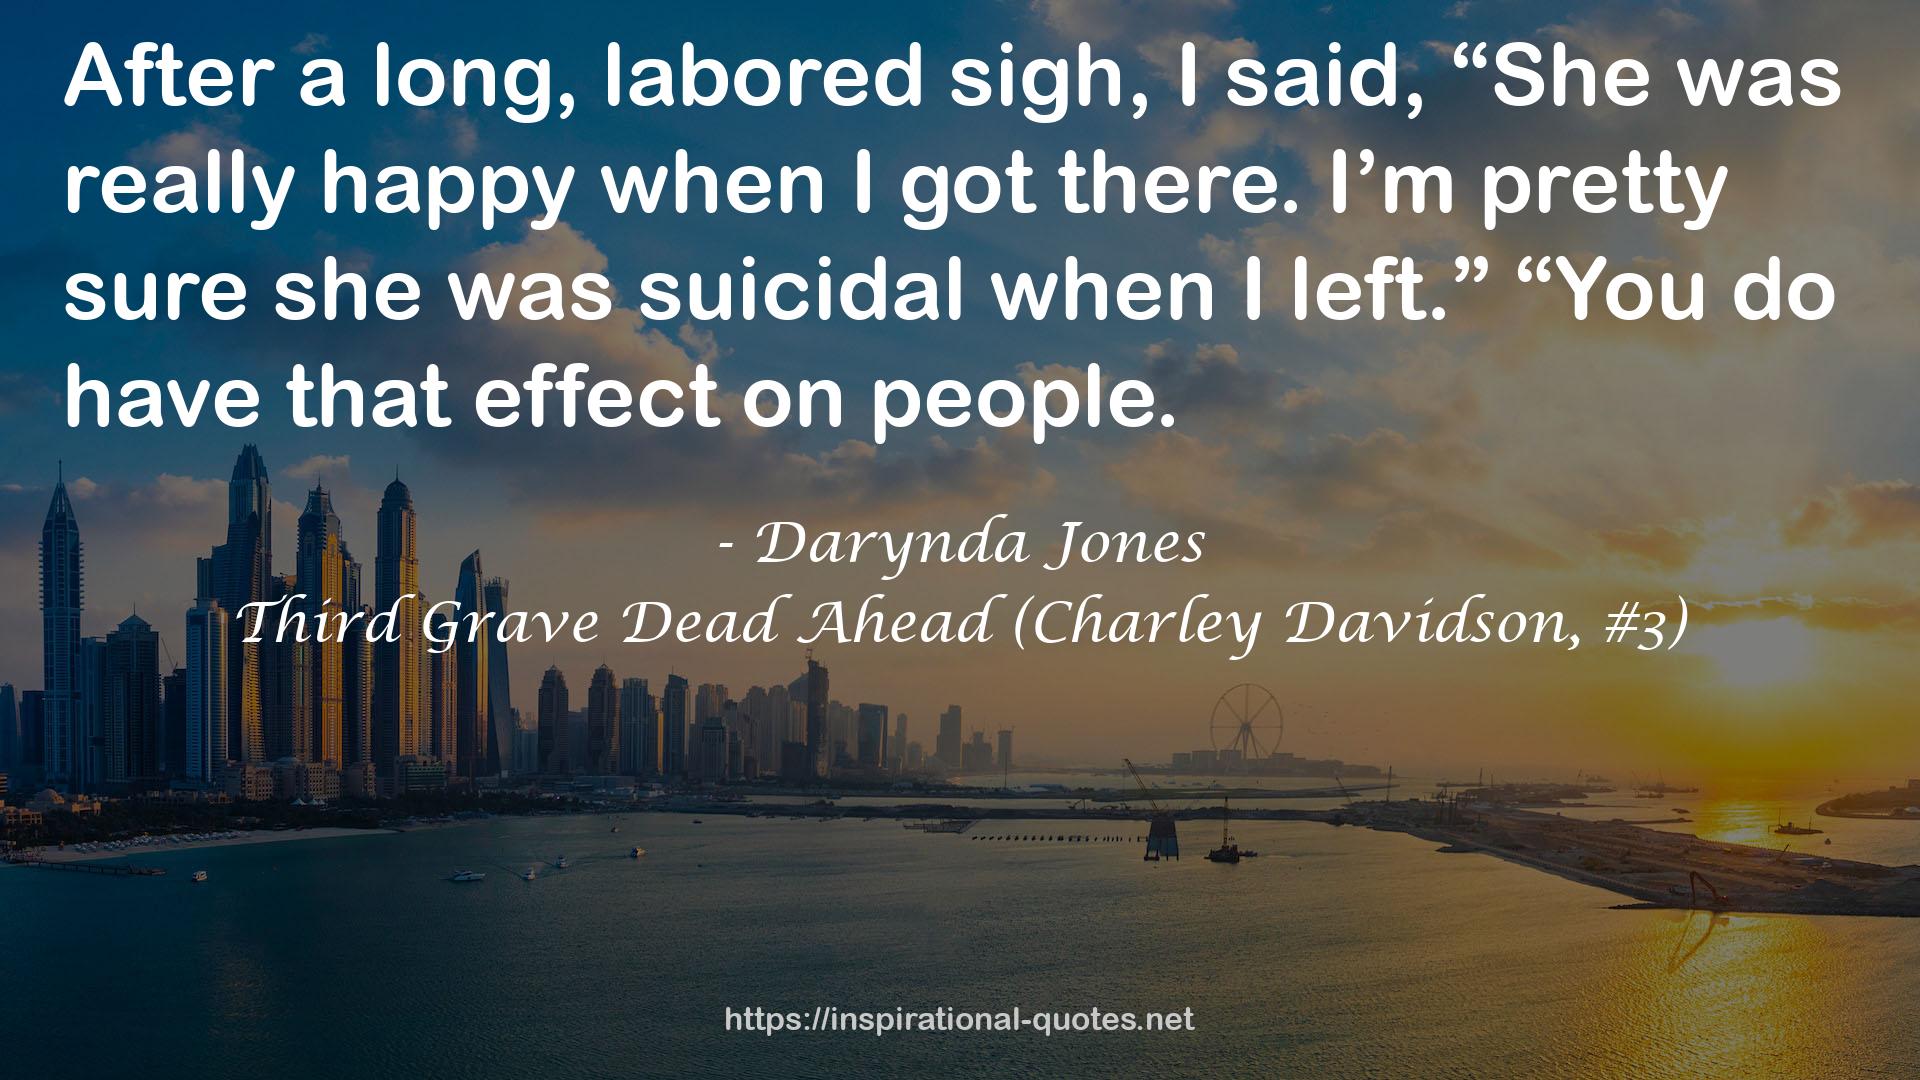 Third Grave Dead Ahead (Charley Davidson, #3) QUOTES